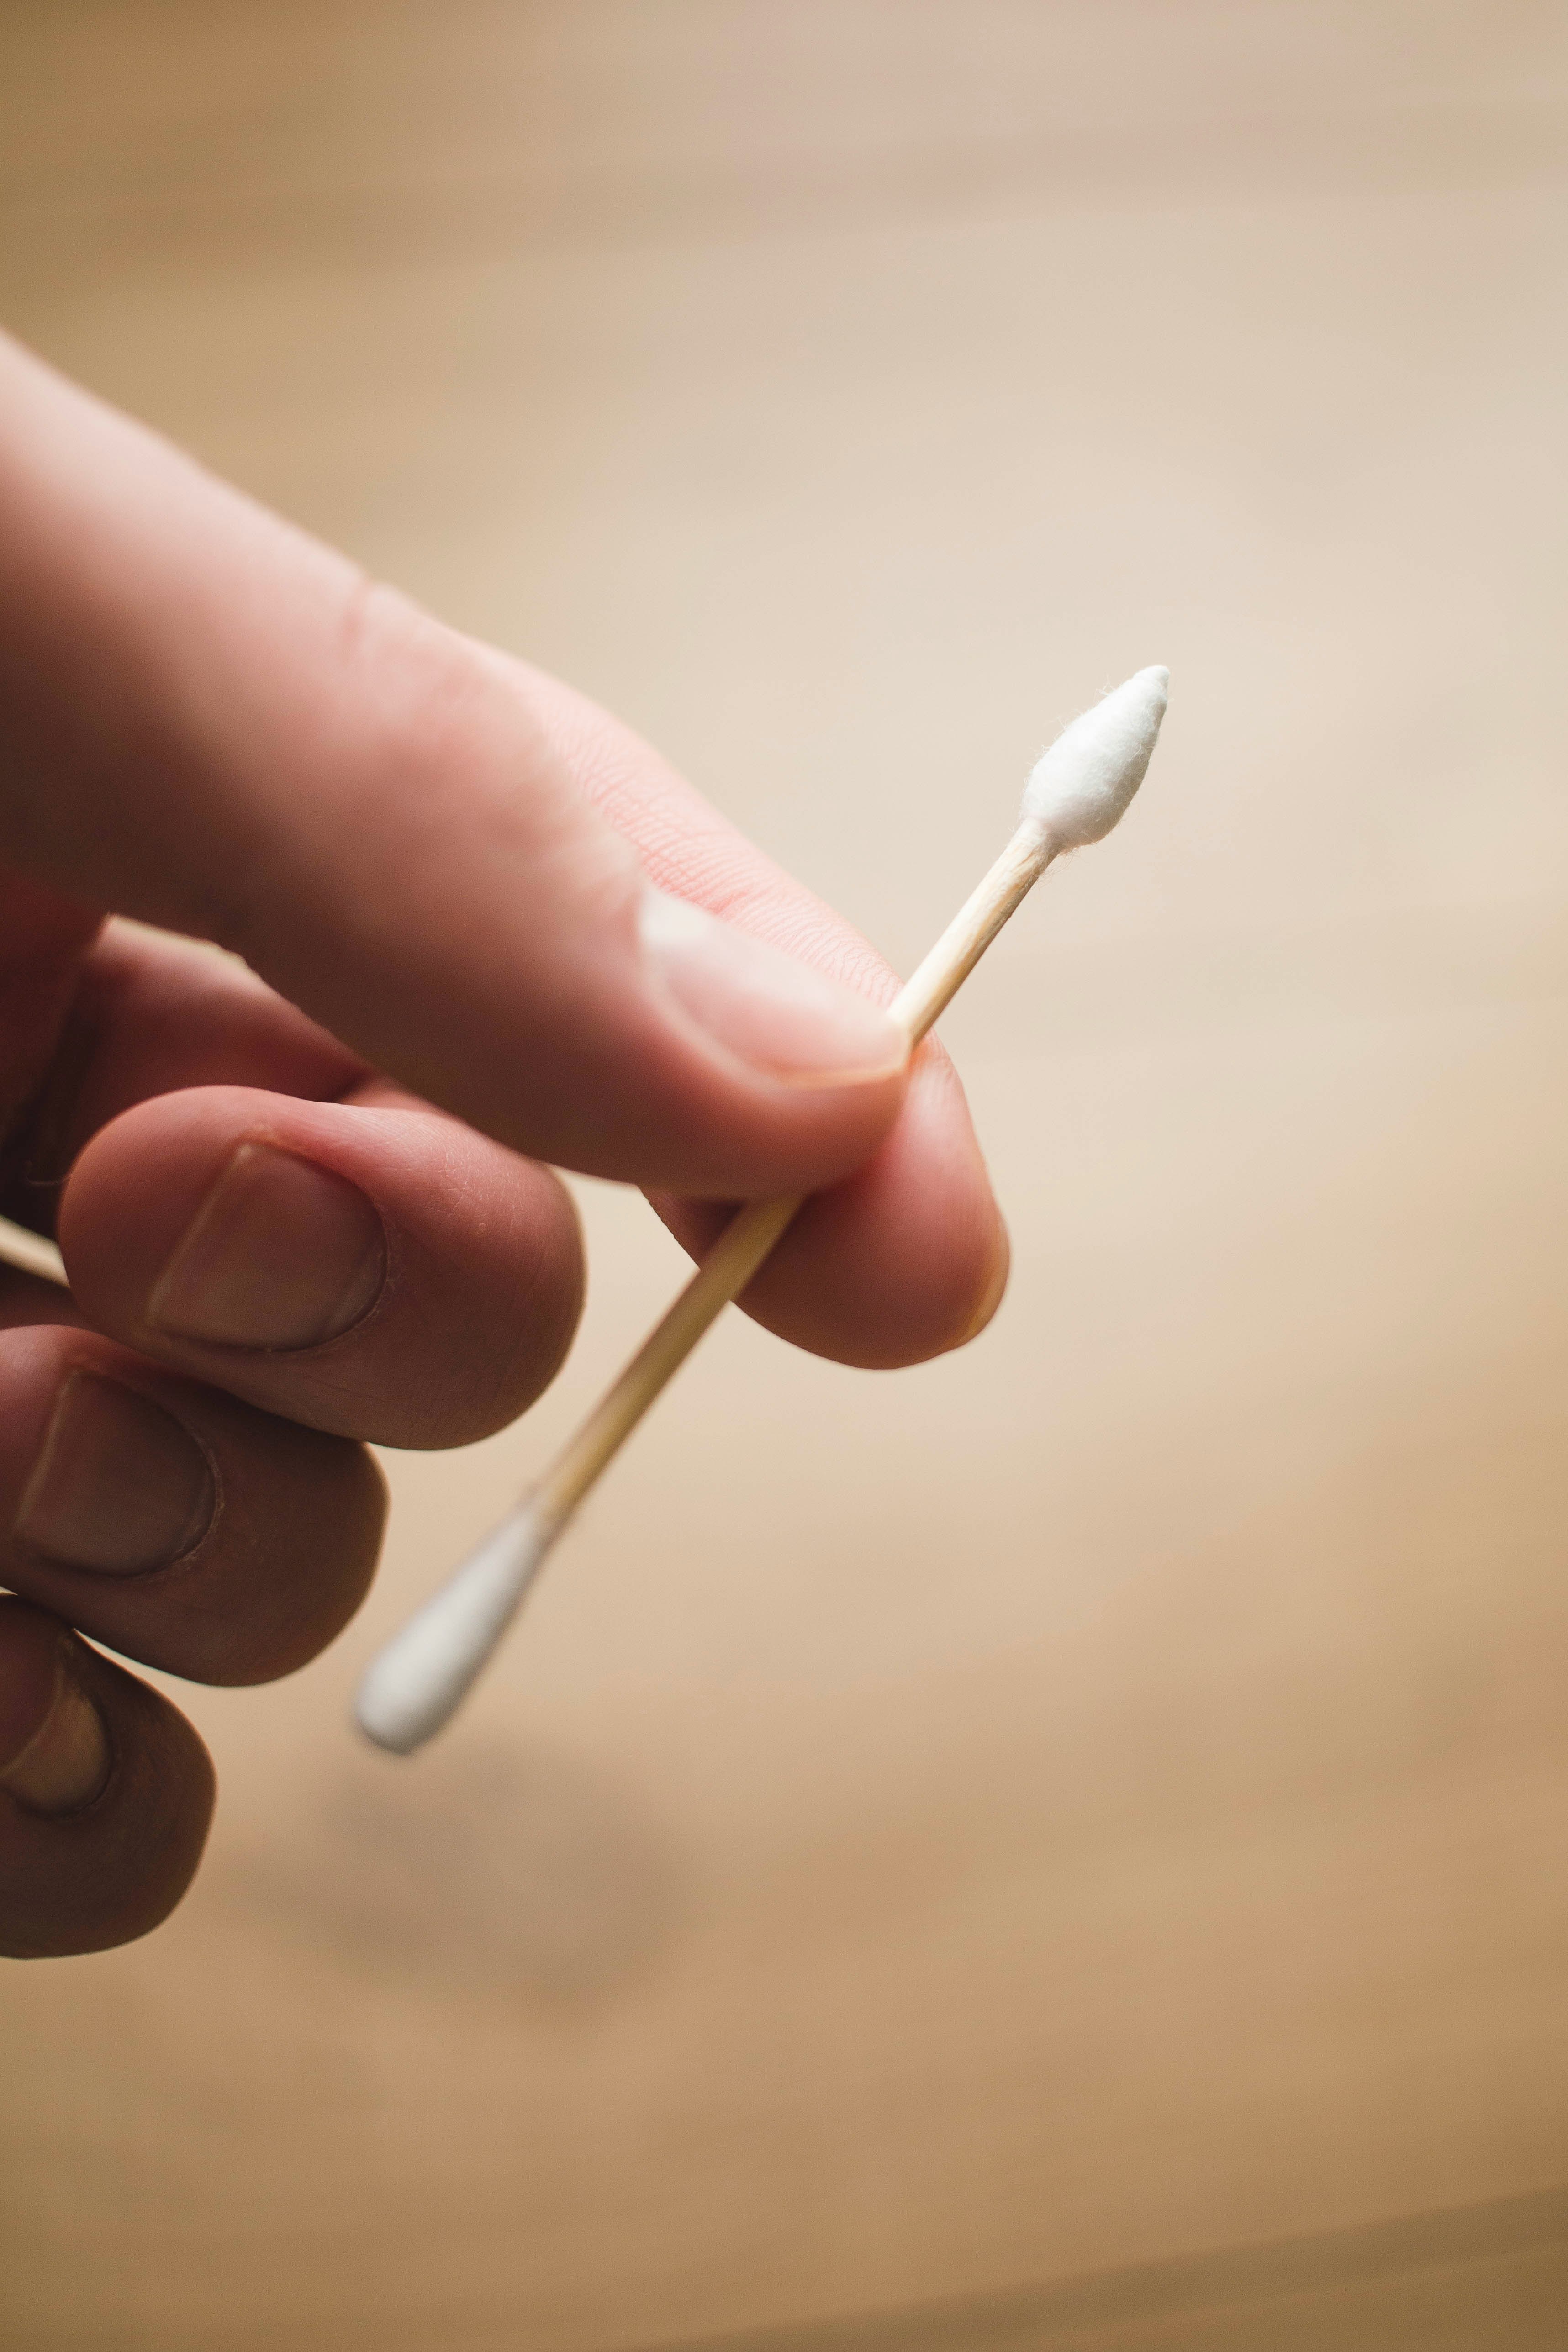 person holding white cotton buds